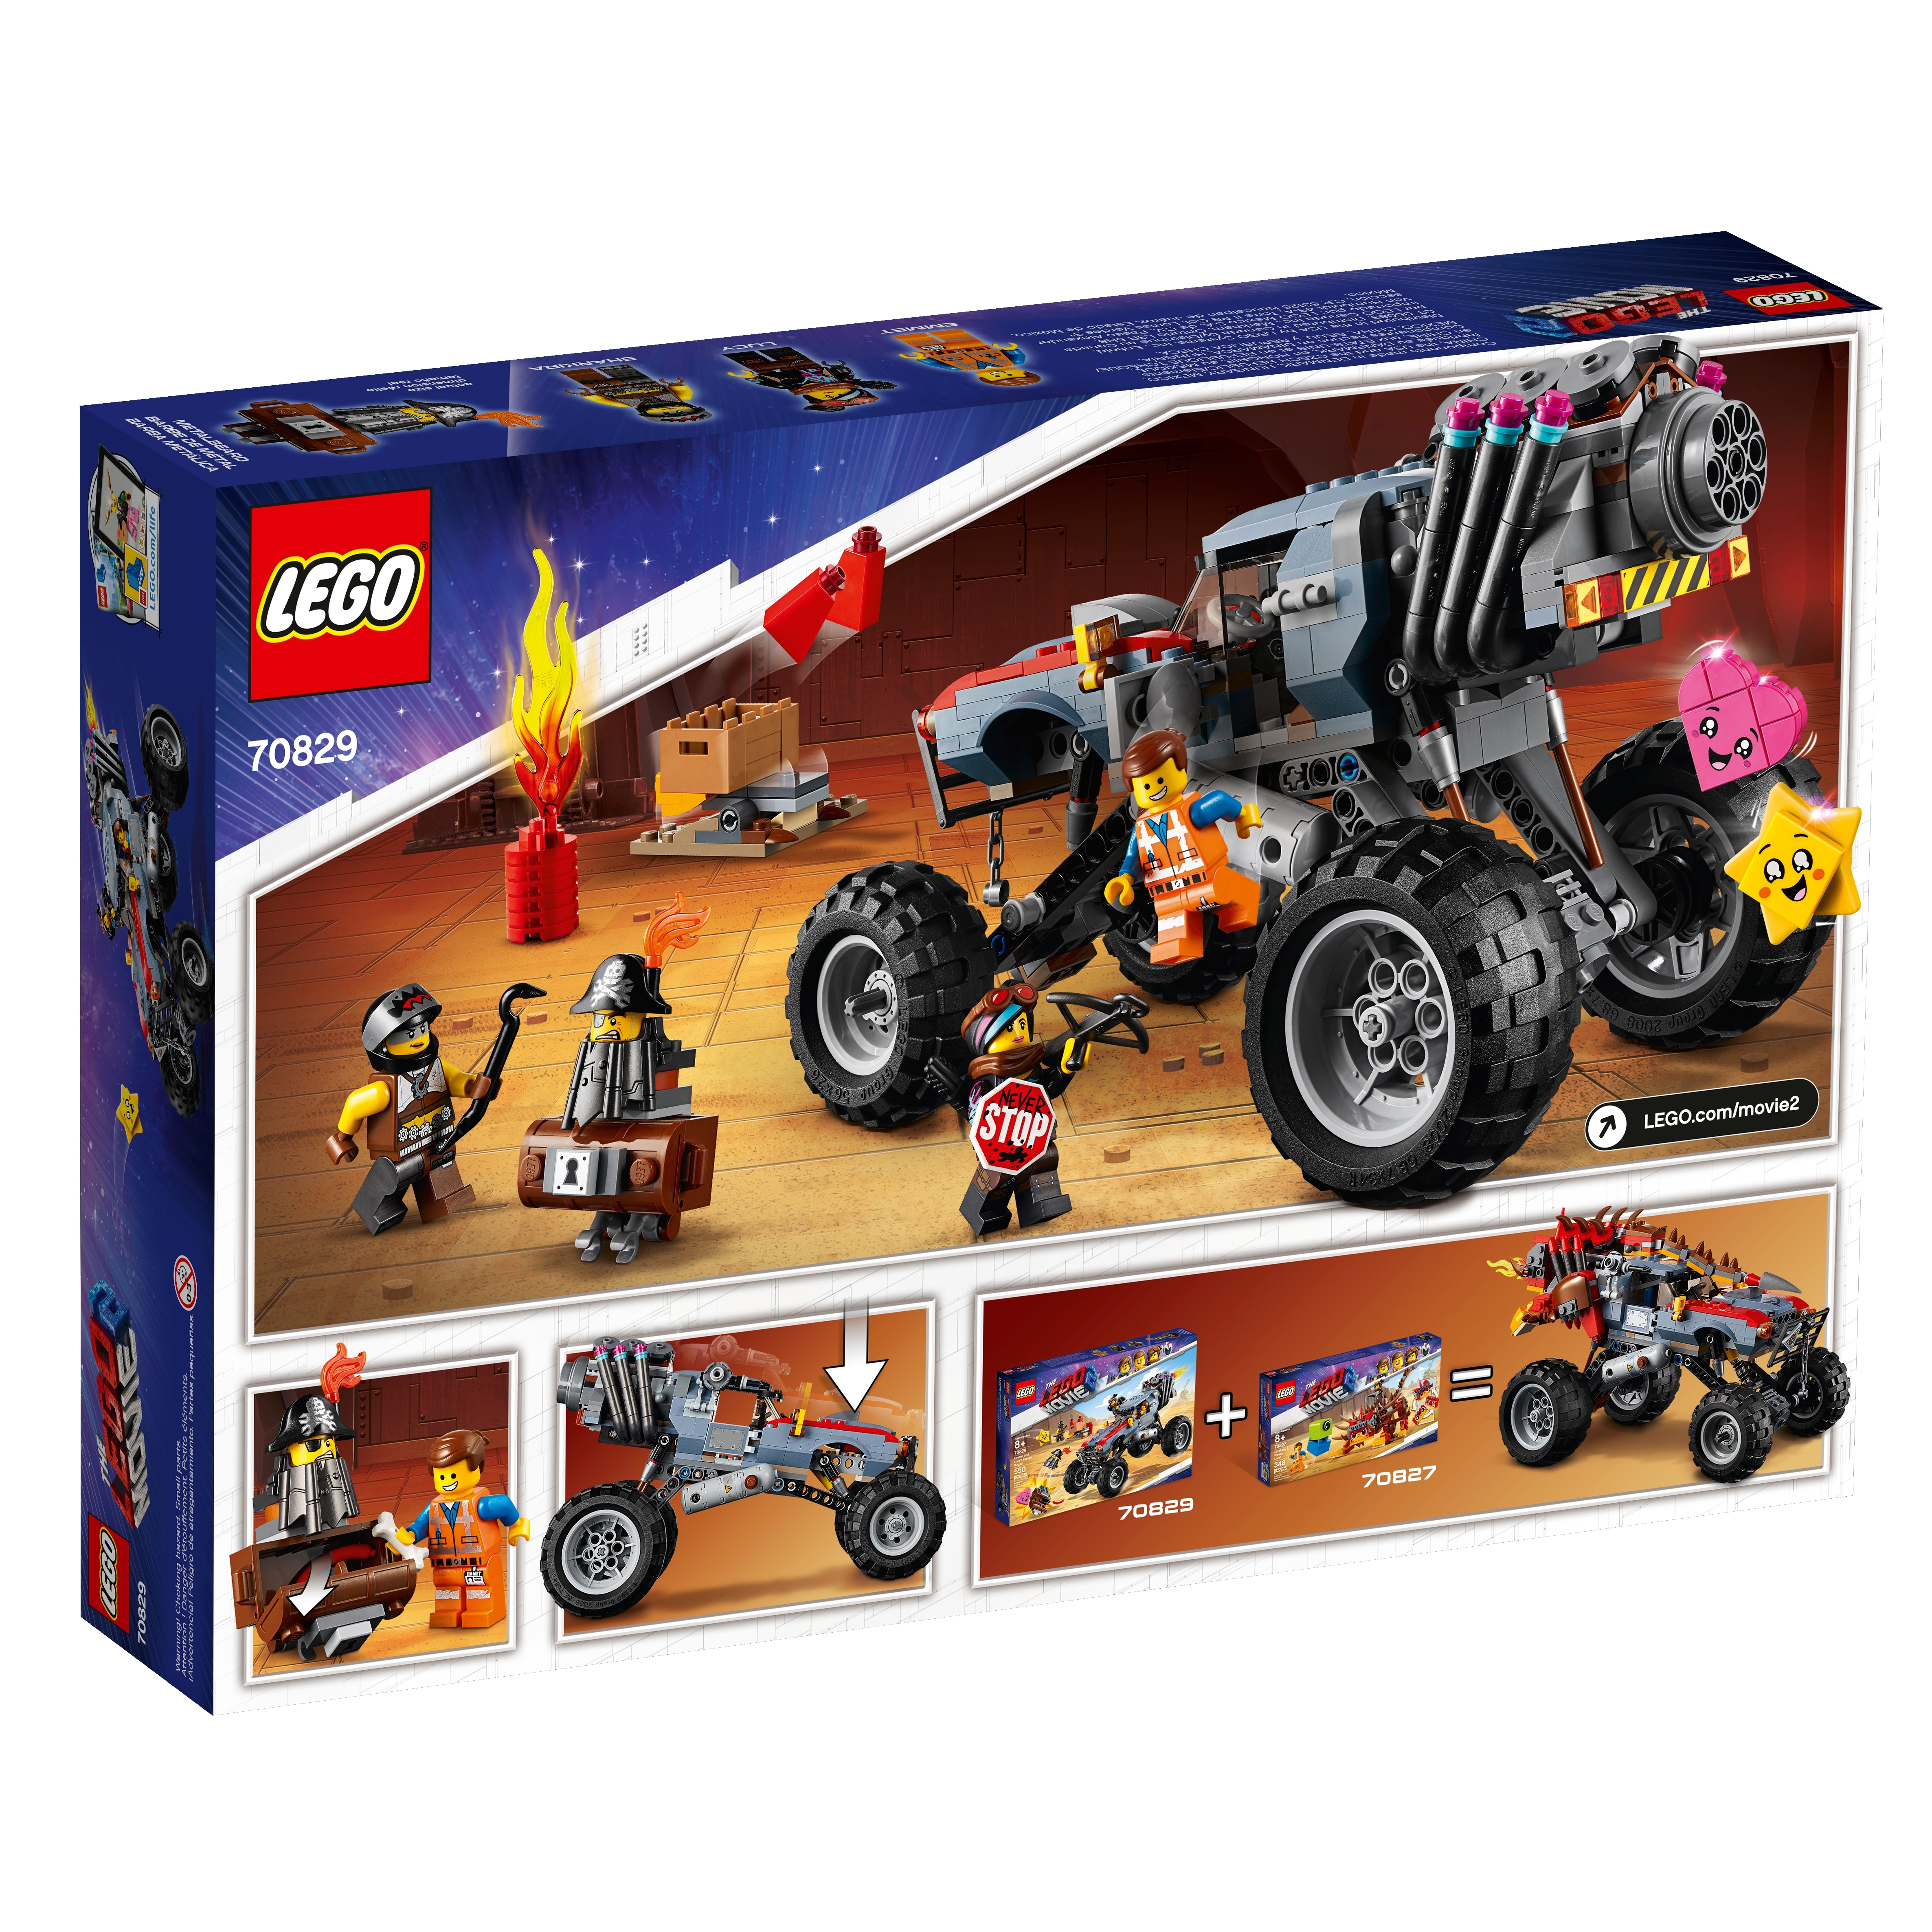 New 2019 550 Pieces Build and Play Toy Car with Action Heroes LEGO THE LEGO MOVIE 2 Escape Buggy 70829 Building Kit 